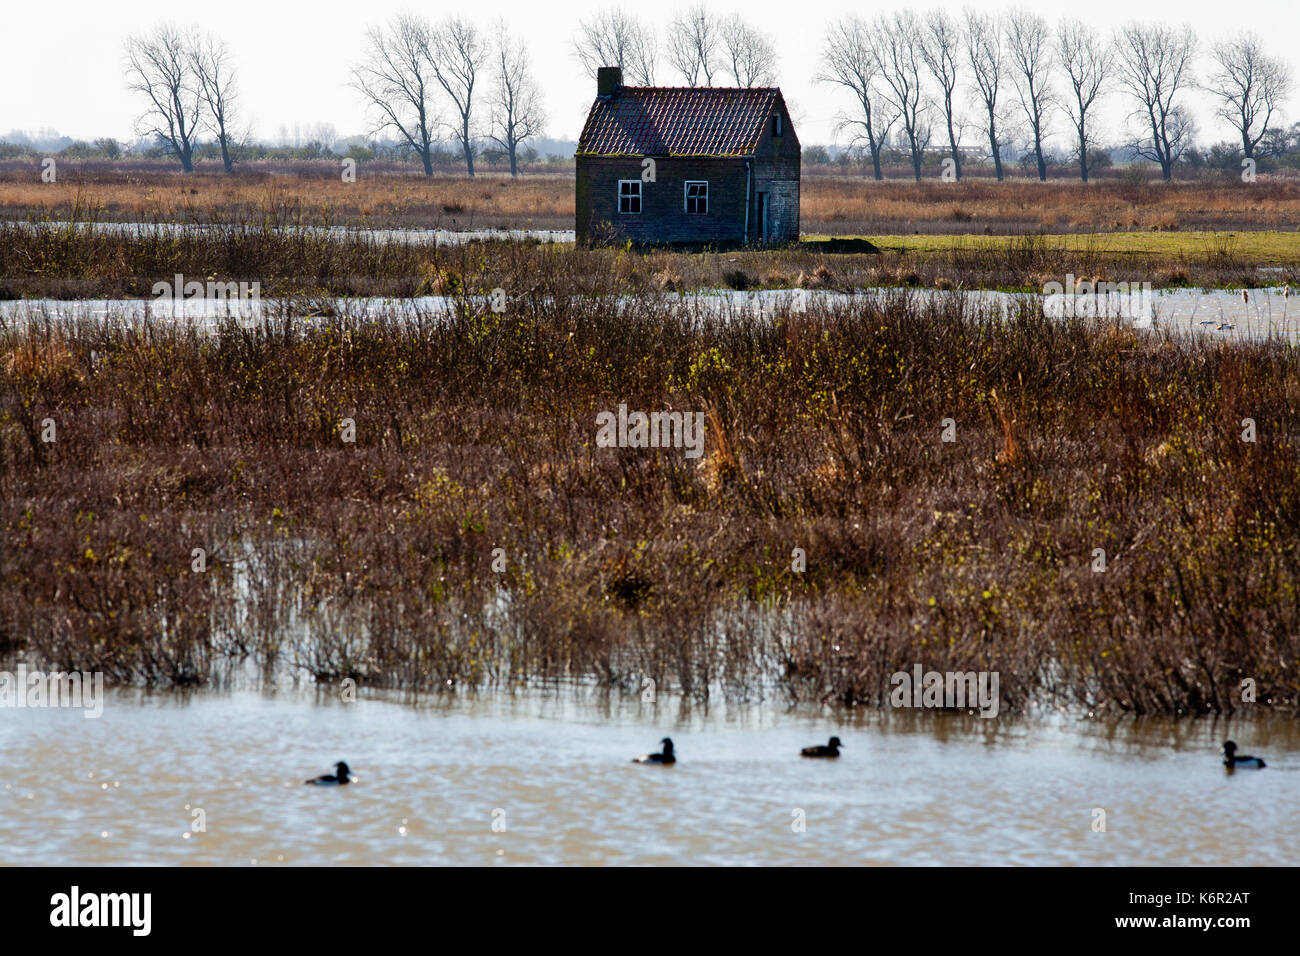 Most of the farms and houses in Tiengemeten, a freshwater tidal area in the Haringvliet estuary in the Netherlands, are abandoned and given back to na Stock Photo